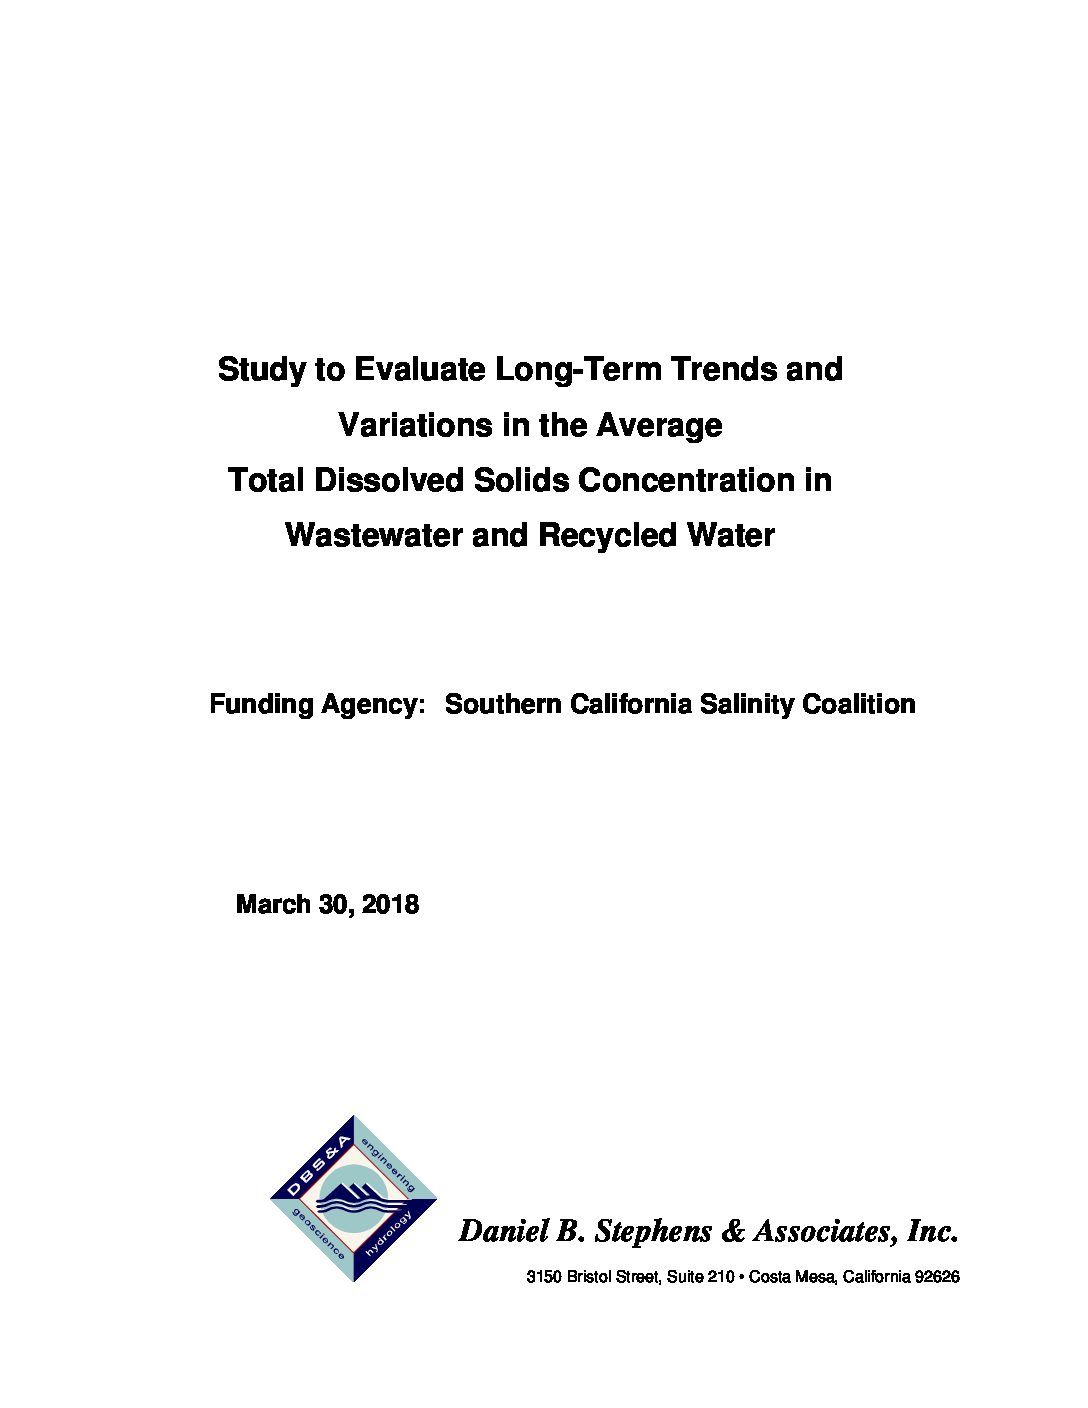 Study to Evaluate Long-Term Trends and Variations in the Average Total Dissolved Solids Concentration in Wastewater and Recycled Water